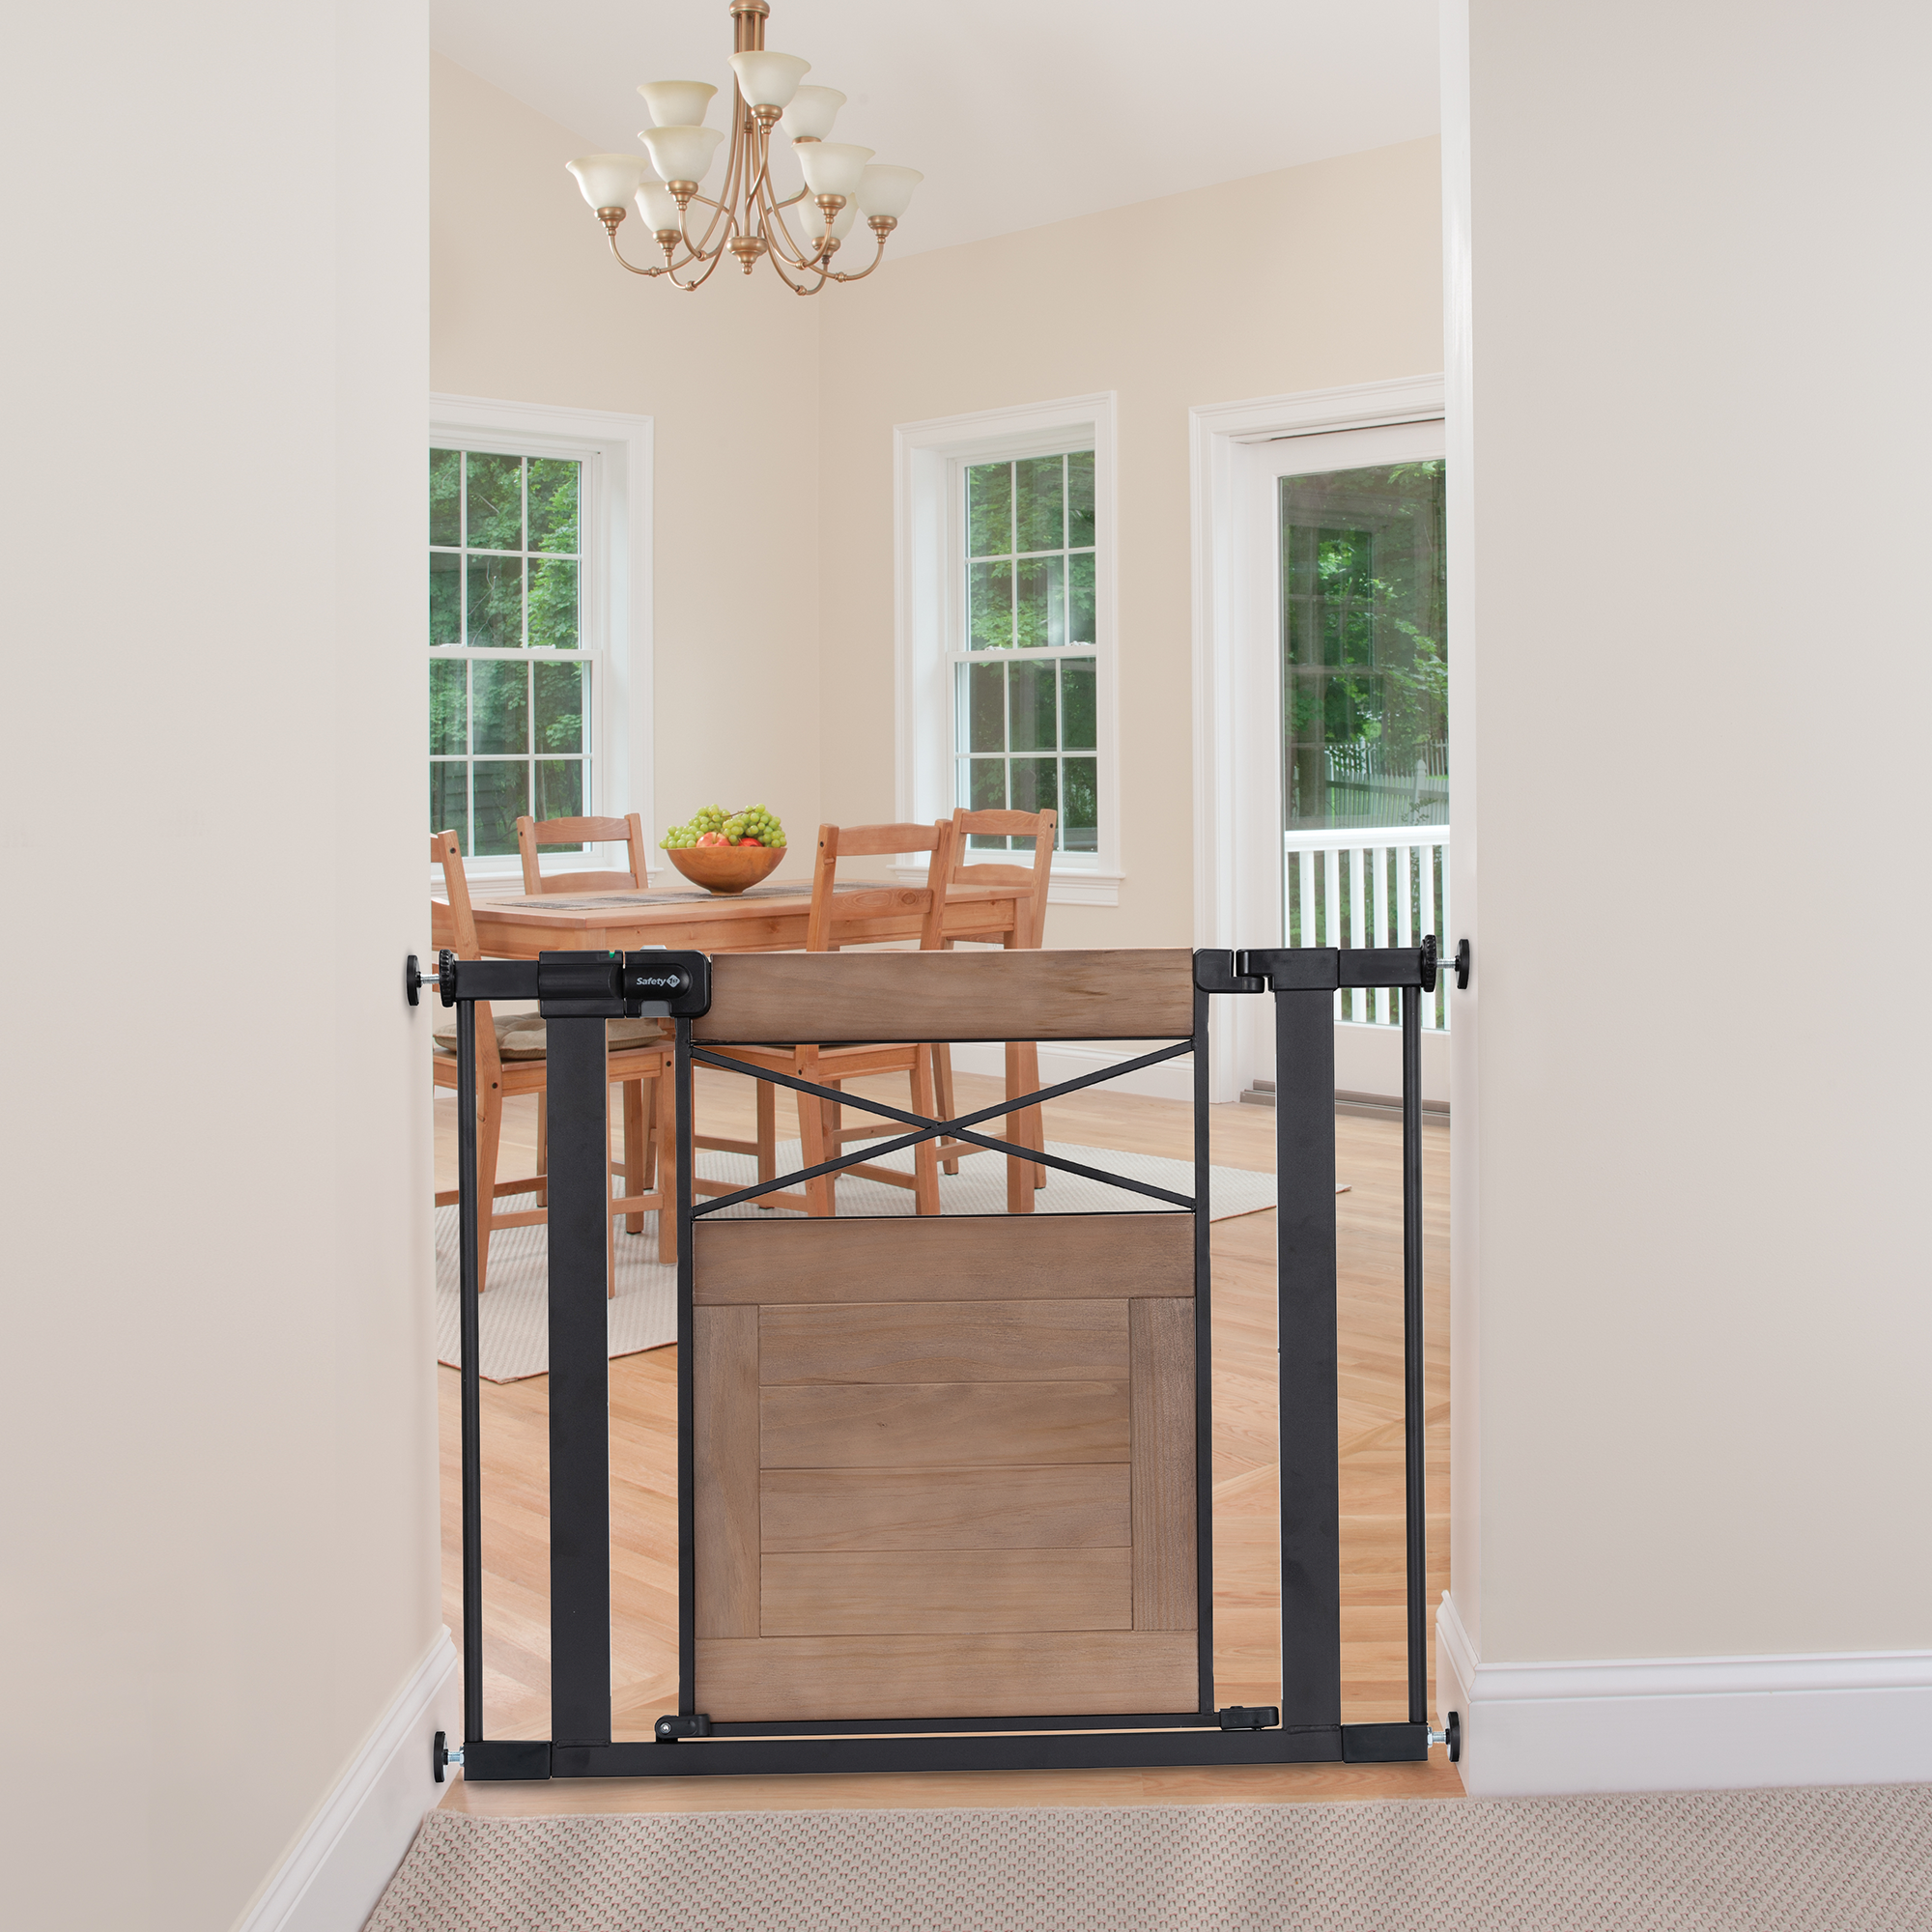 farmhouse style gate installed between two rooms